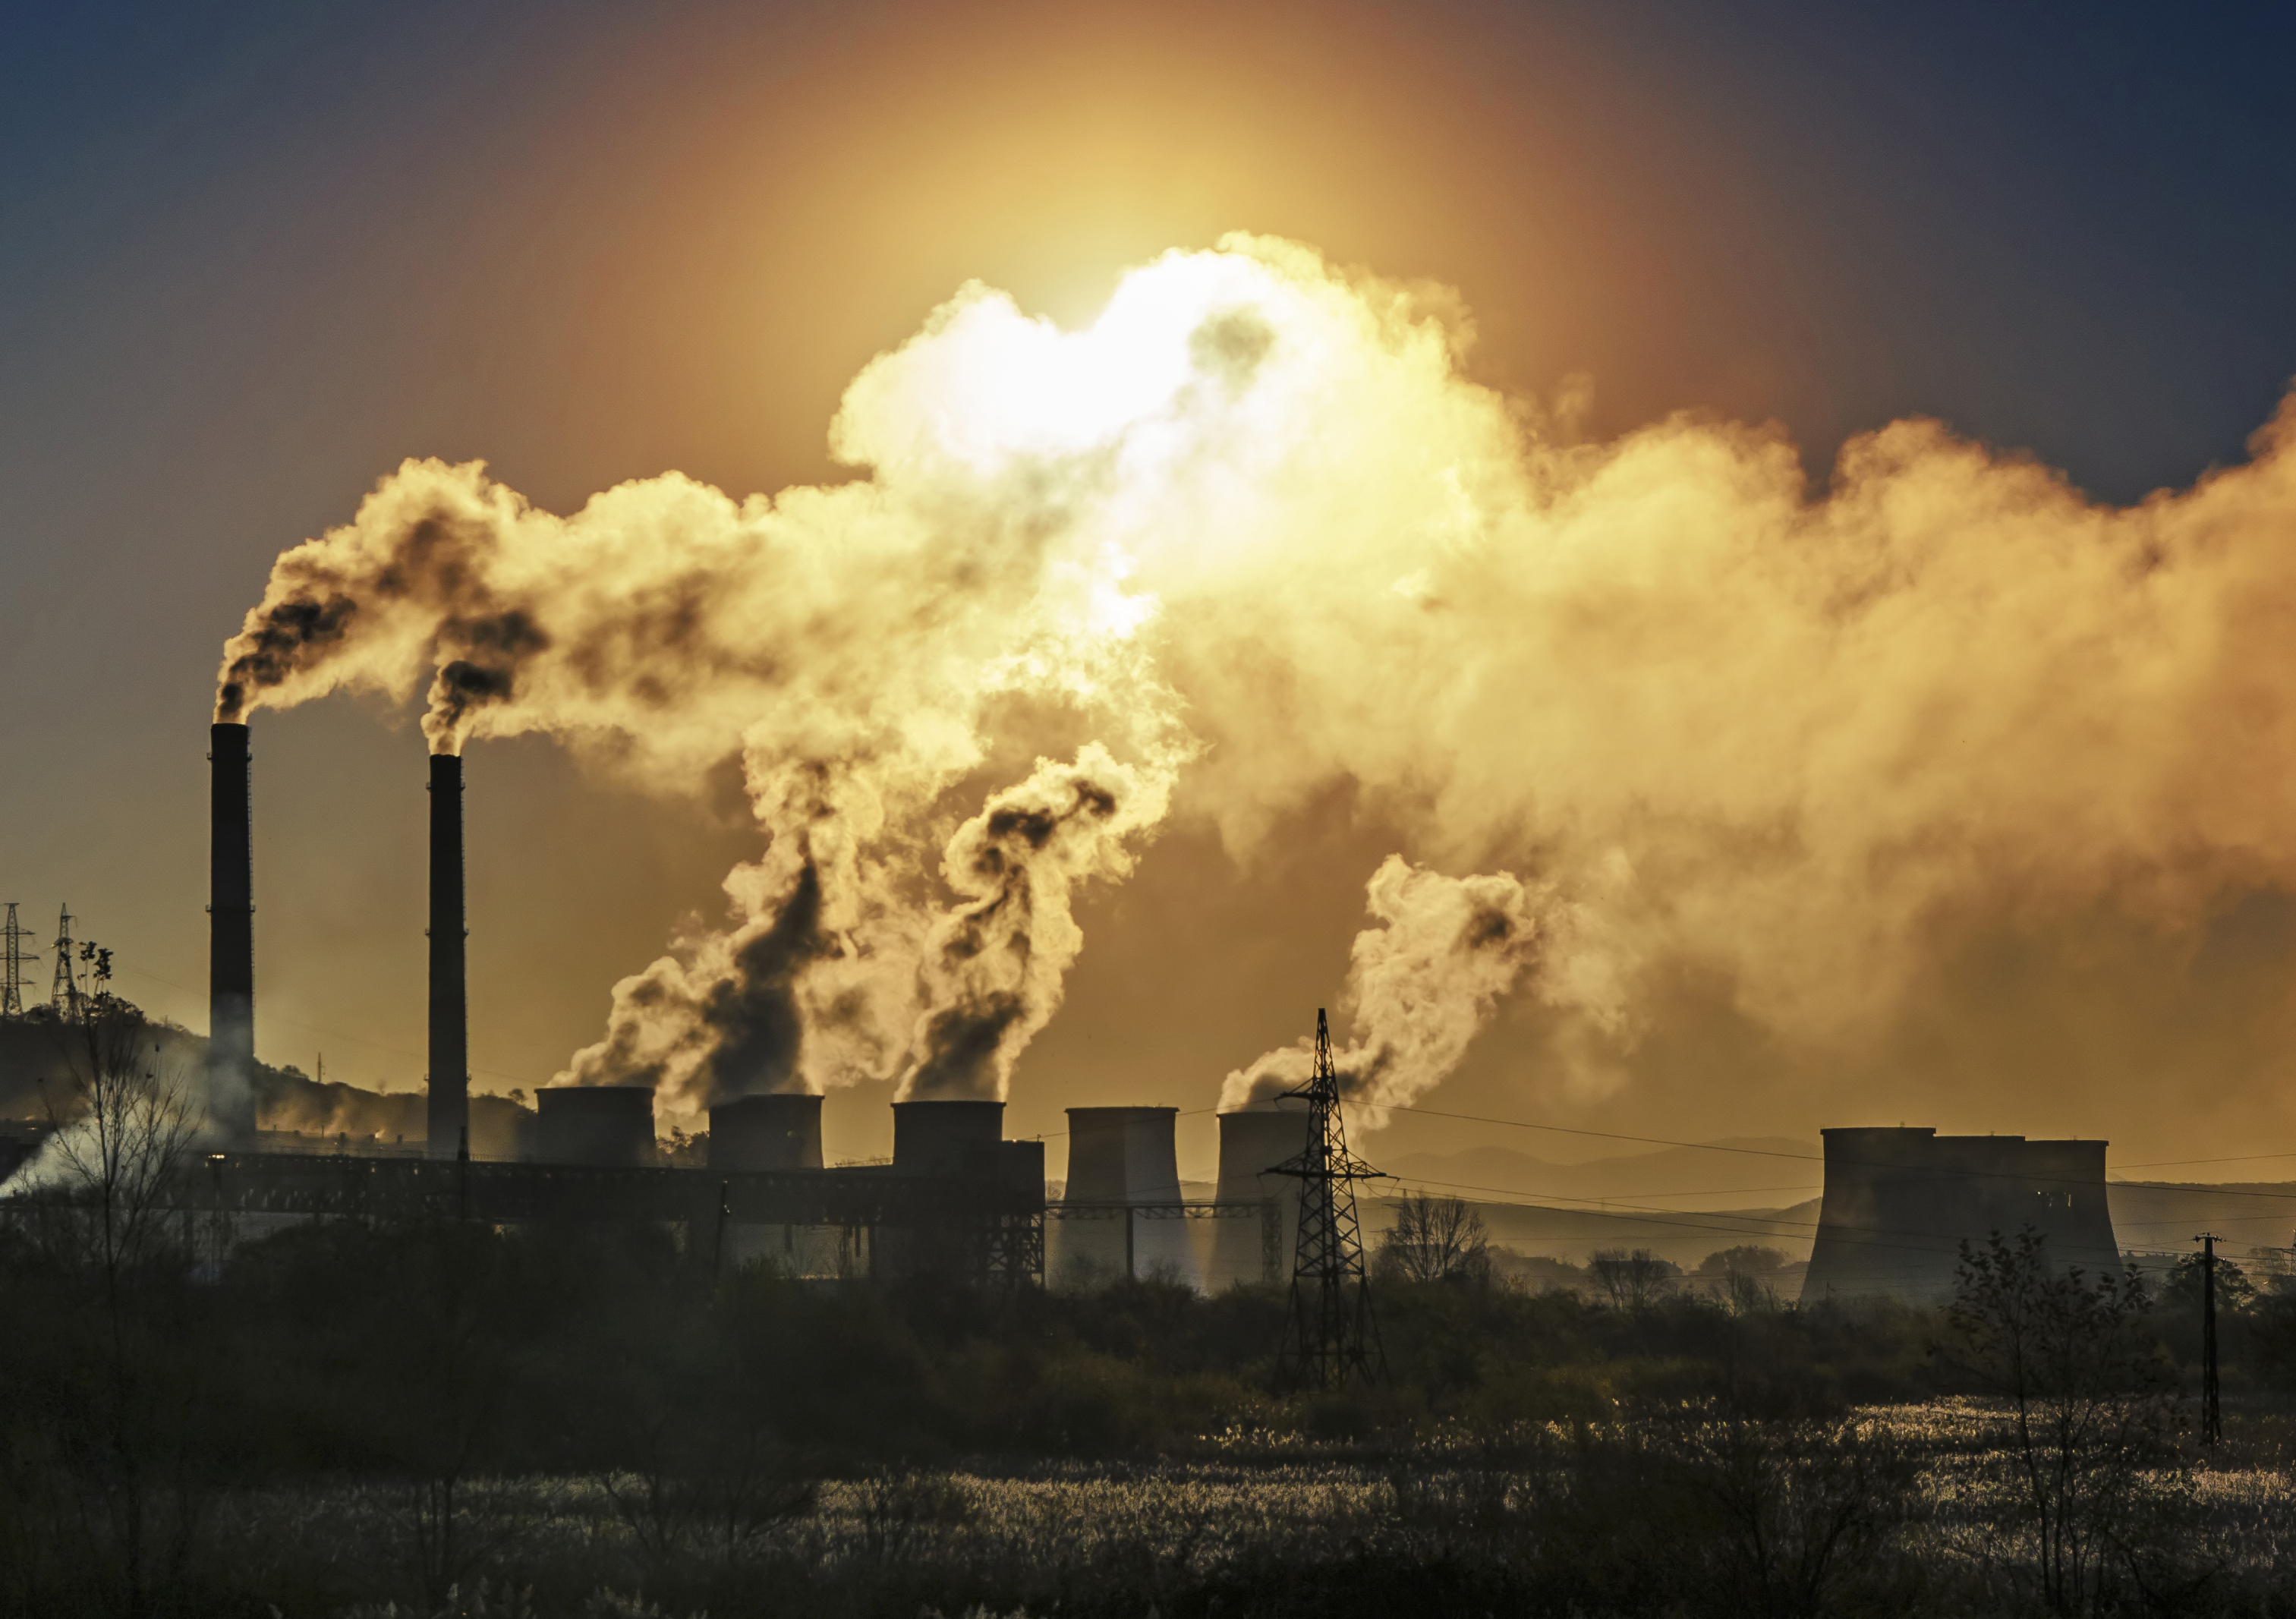 Power plants contributing to global warming